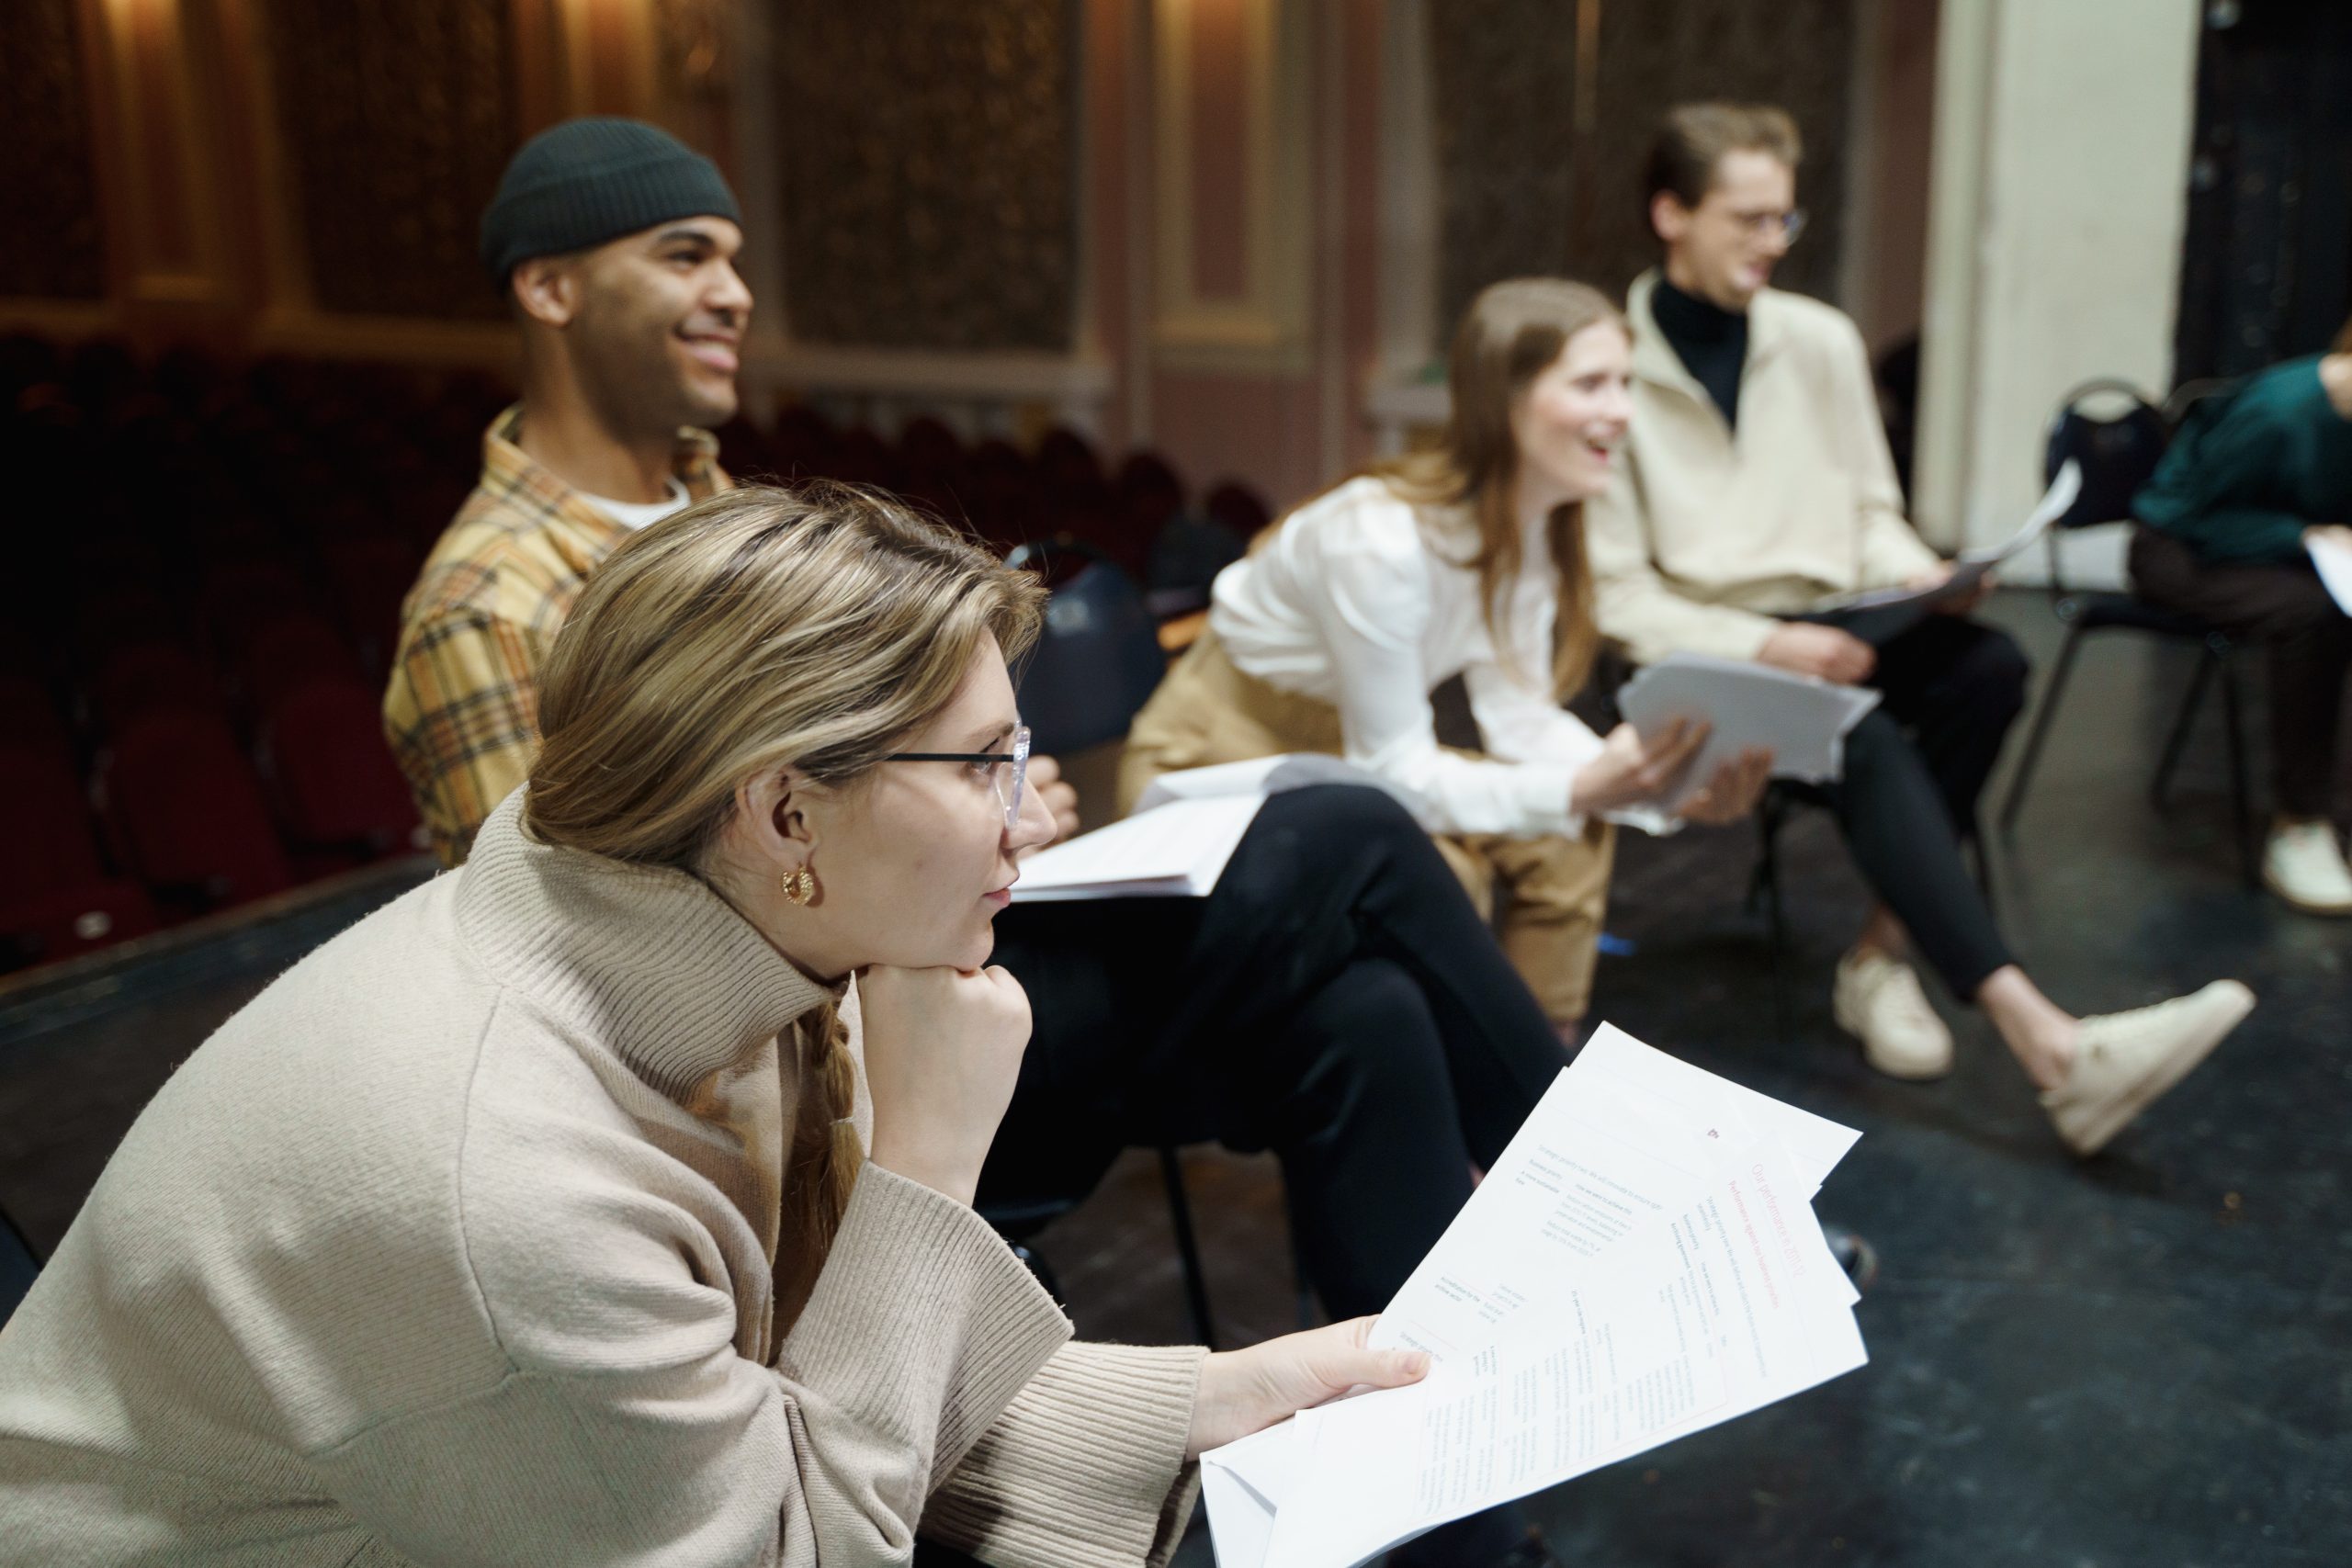 voice coaching work lessons for studio stage drama acting skills training